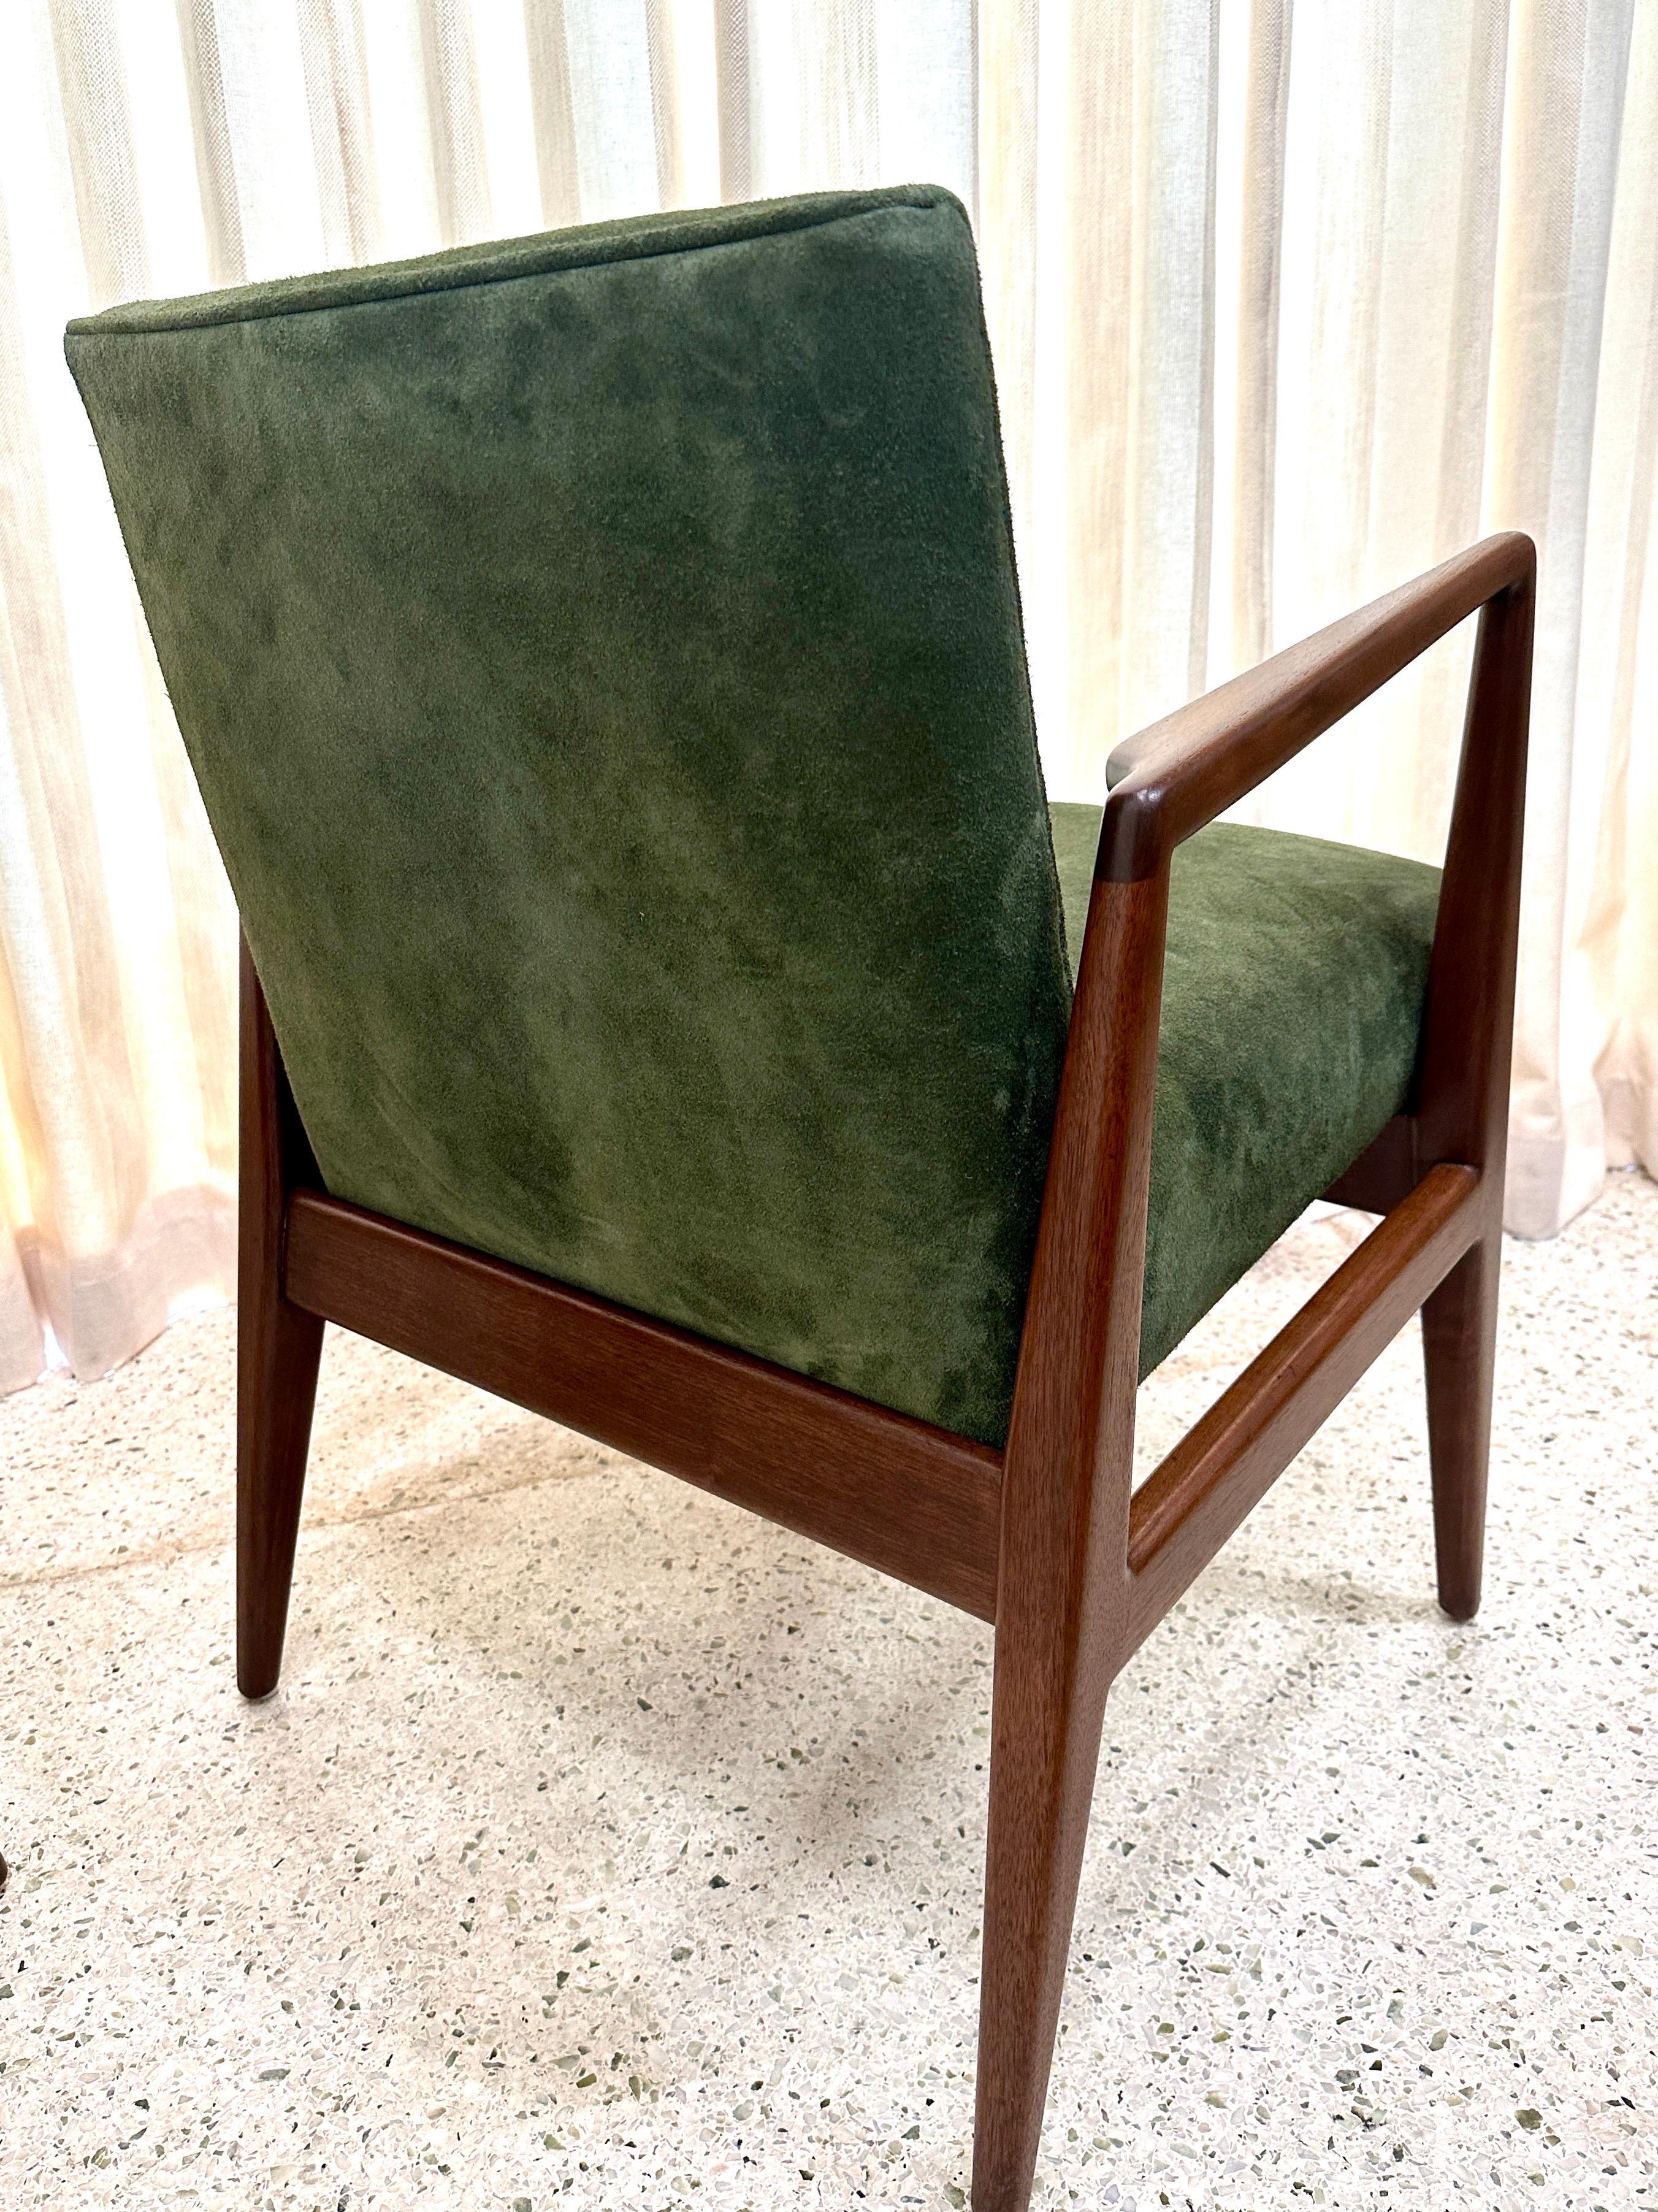 Original Vintage Jens Risom Armchairs in Green Suede w/ Label, PAIR For Sale 2